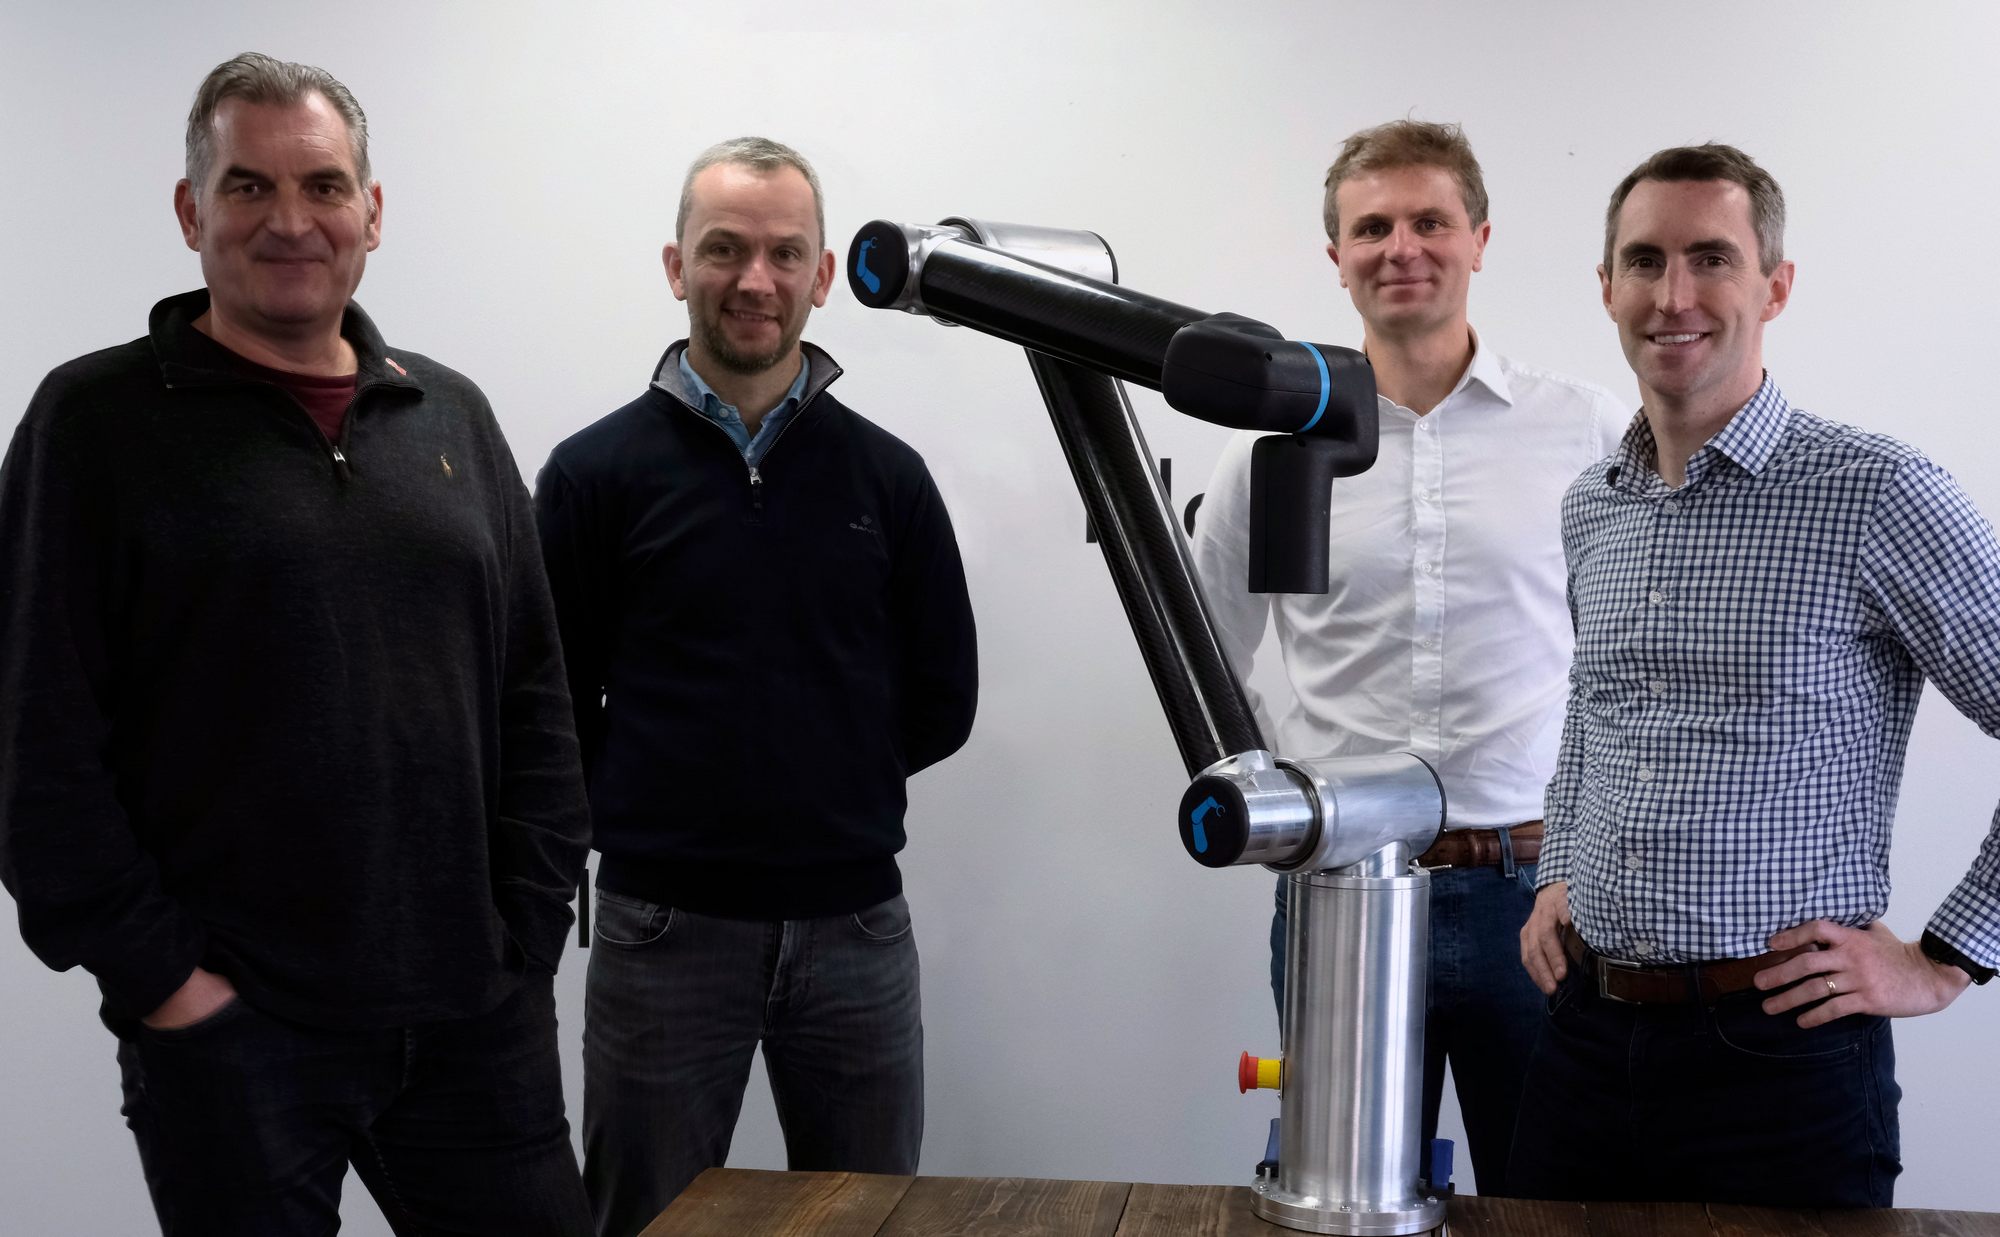 Aberdeen-headquartered Leap Automation secures seven figure investment to develop business